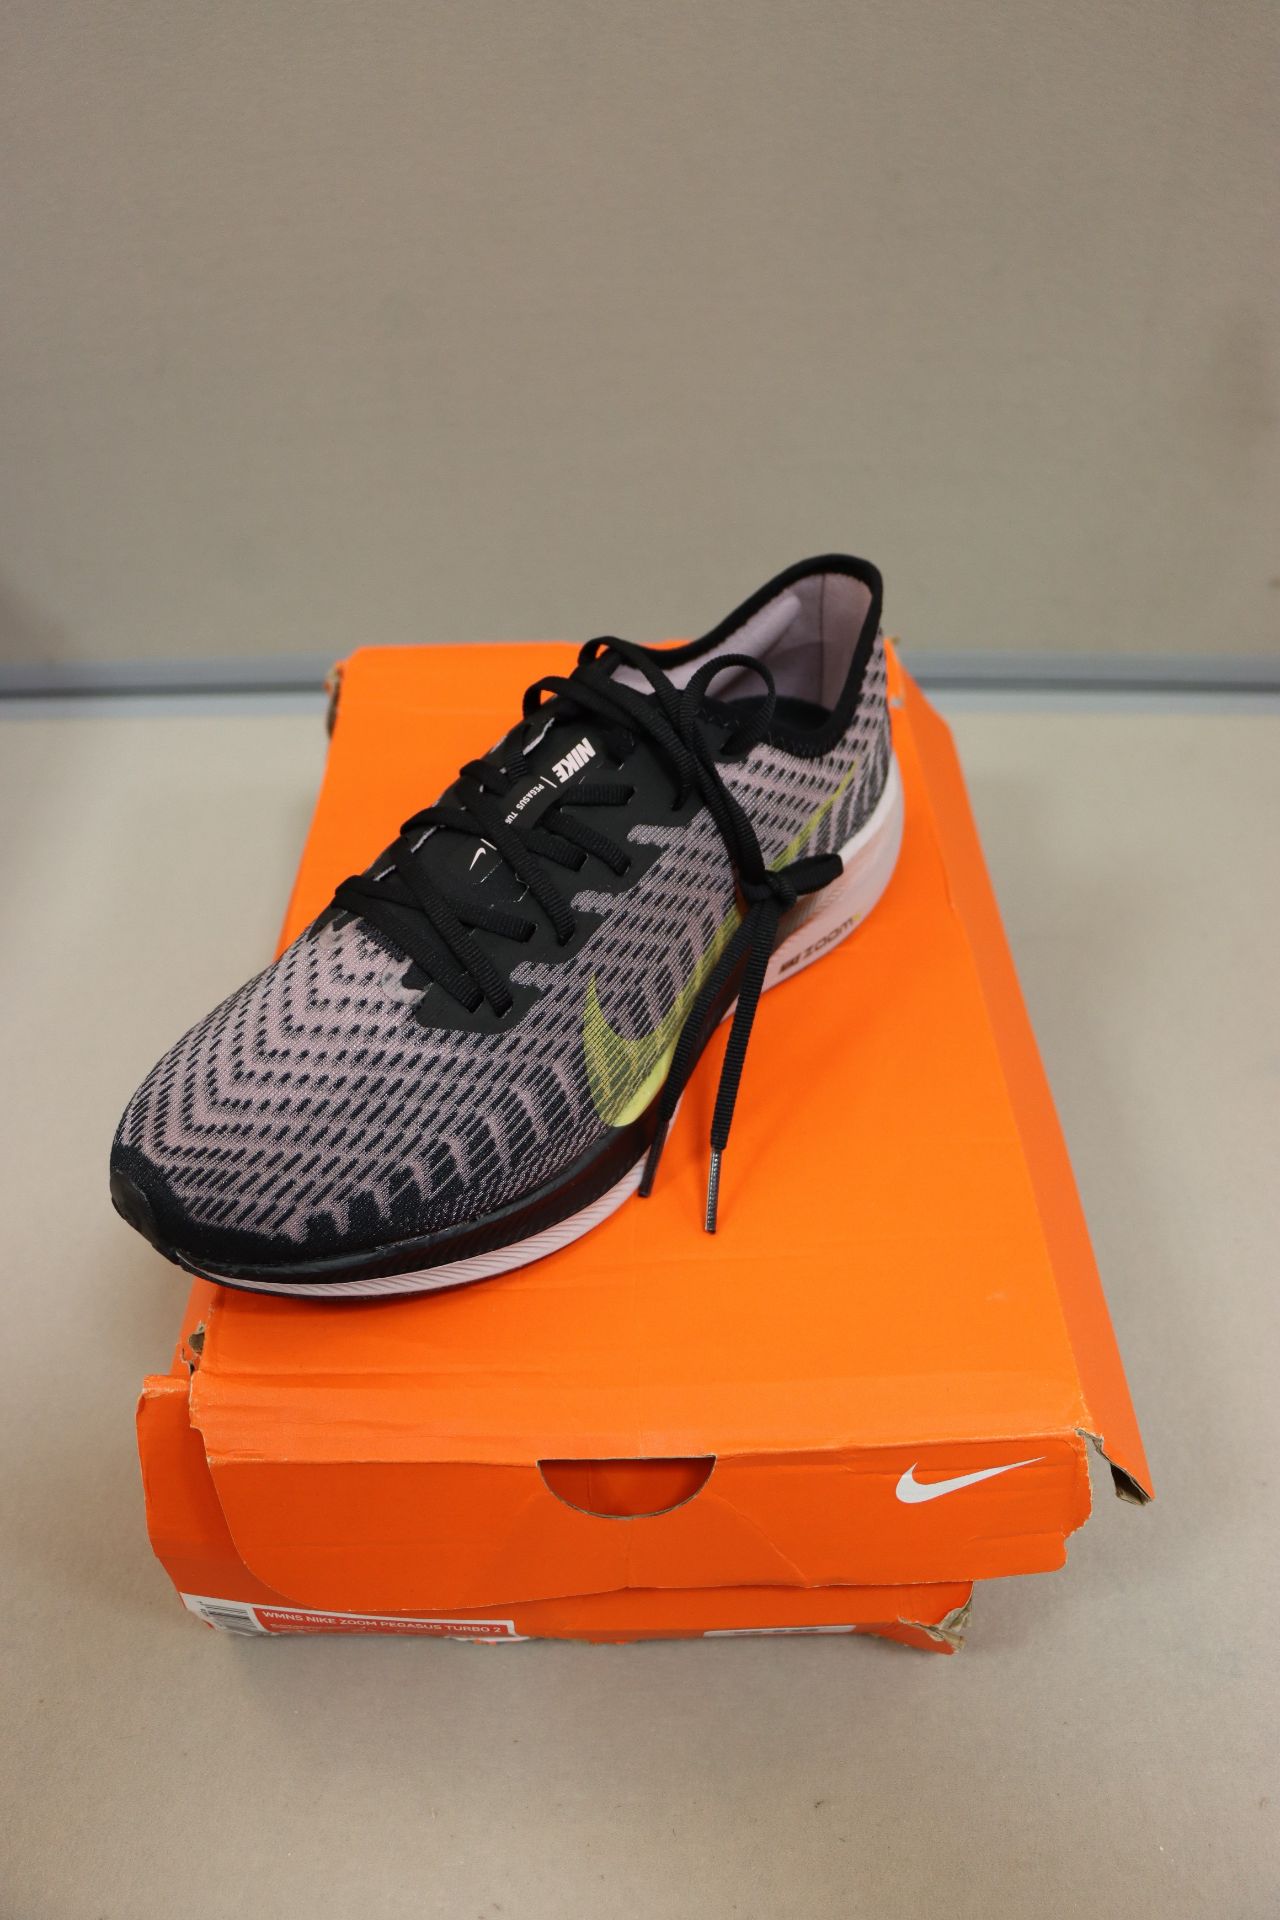 A pair of as new Nike Zoom Pegasus Turbo 2 women's trainers (UK 8) (Damage to box).